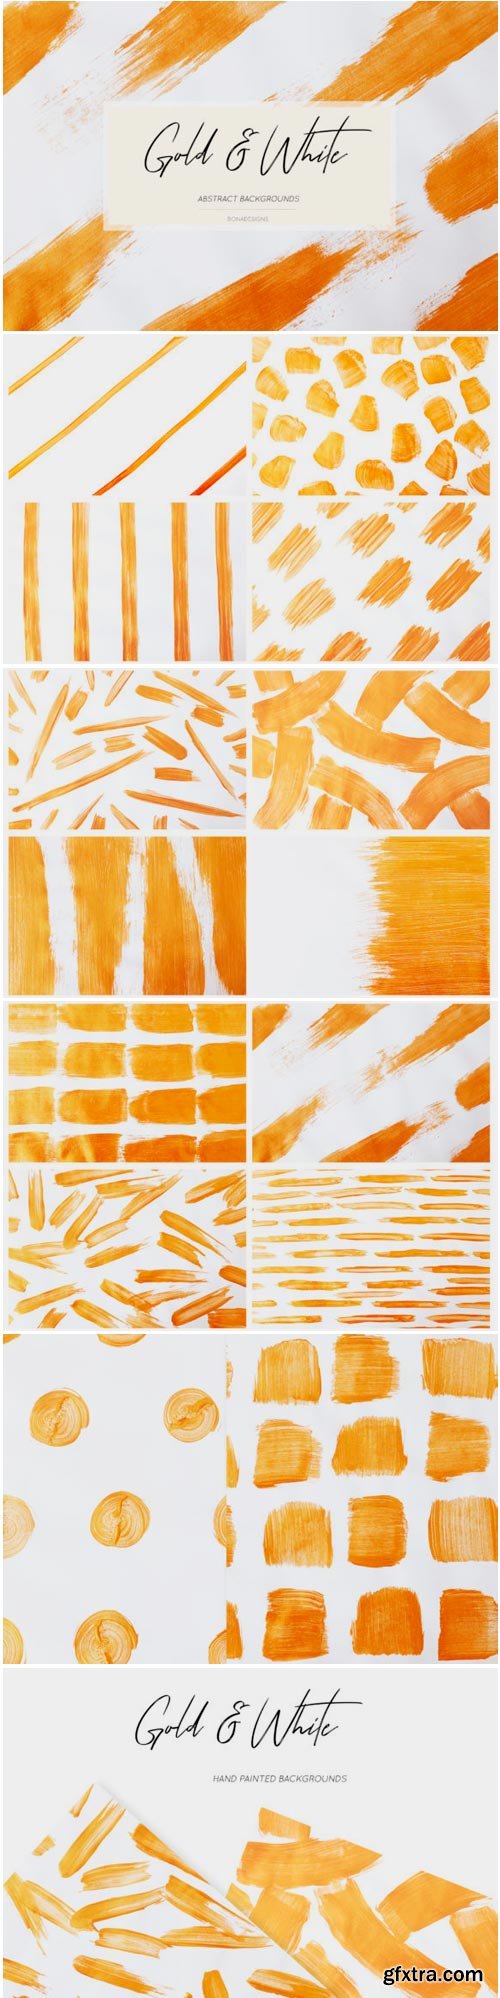 Gold & White Abstract Backgrounds 1609800